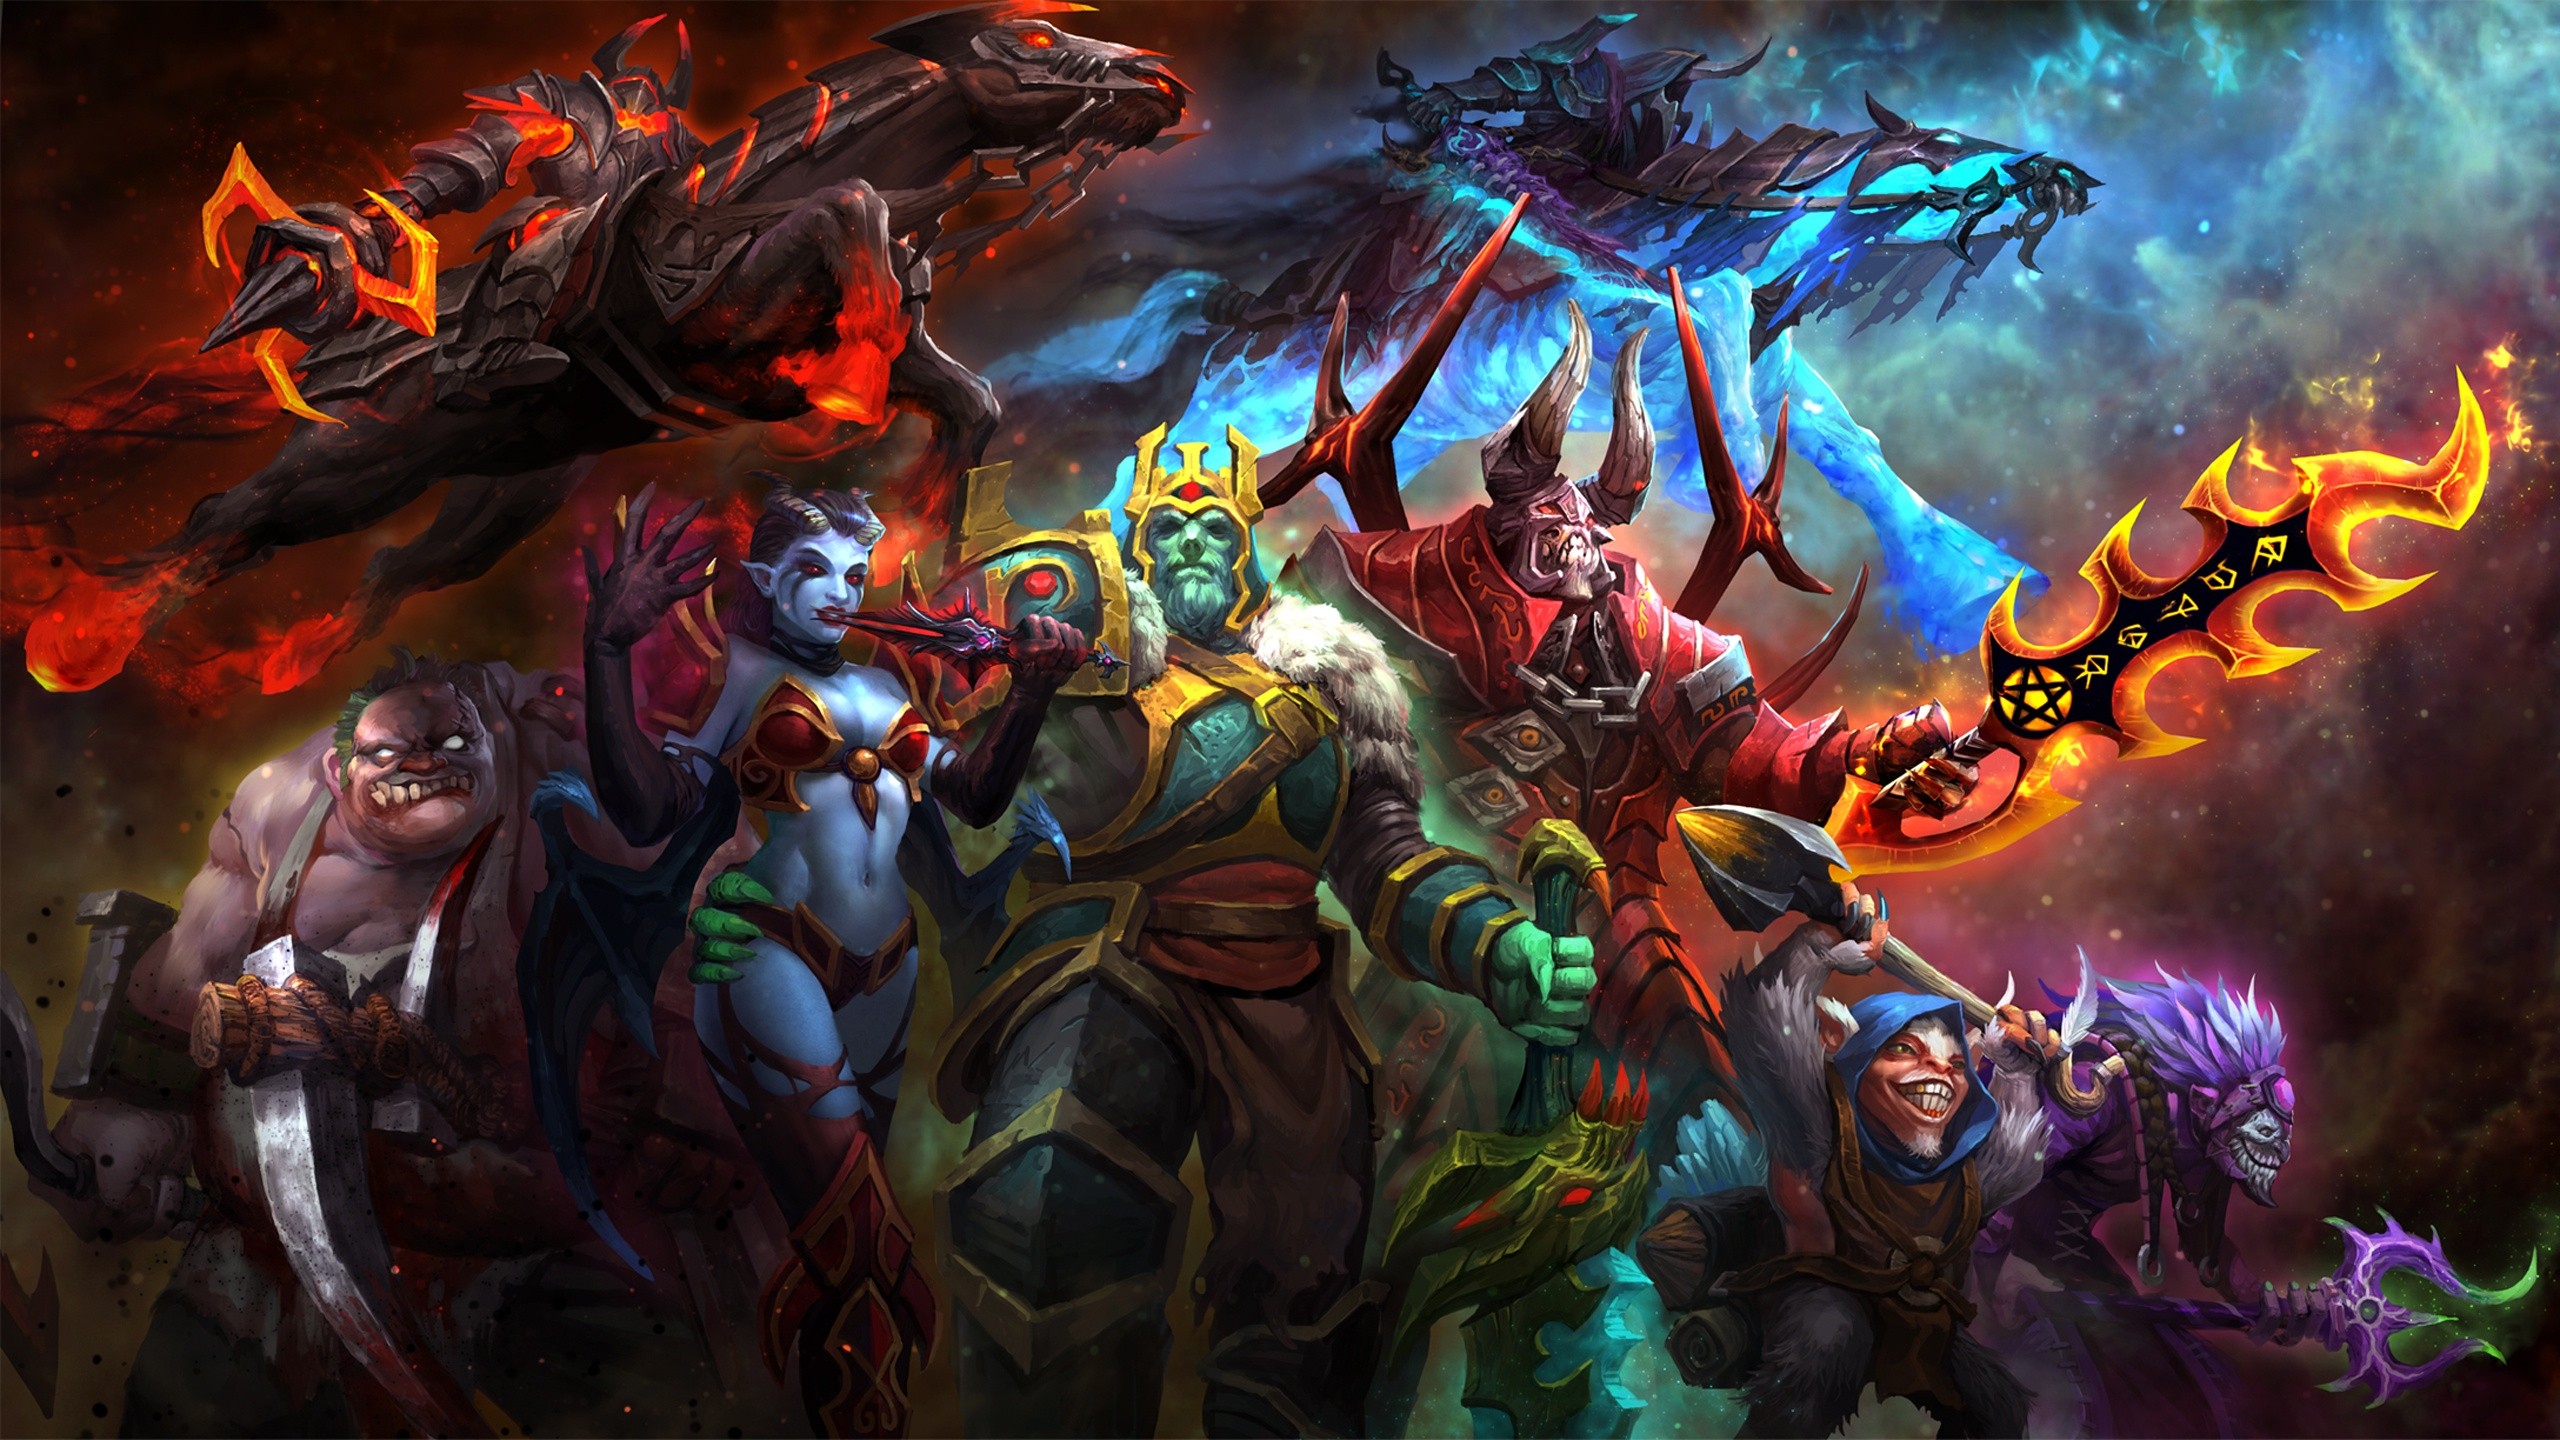 General 2560x1440 Dota Dota 2 Valve Corporation hero video games Wraith King Pudge Queen of Pain meepo dazzle Cahos Knight Abaddon PC gaming belly boobs video game art fantasy art fantasy girl succubus